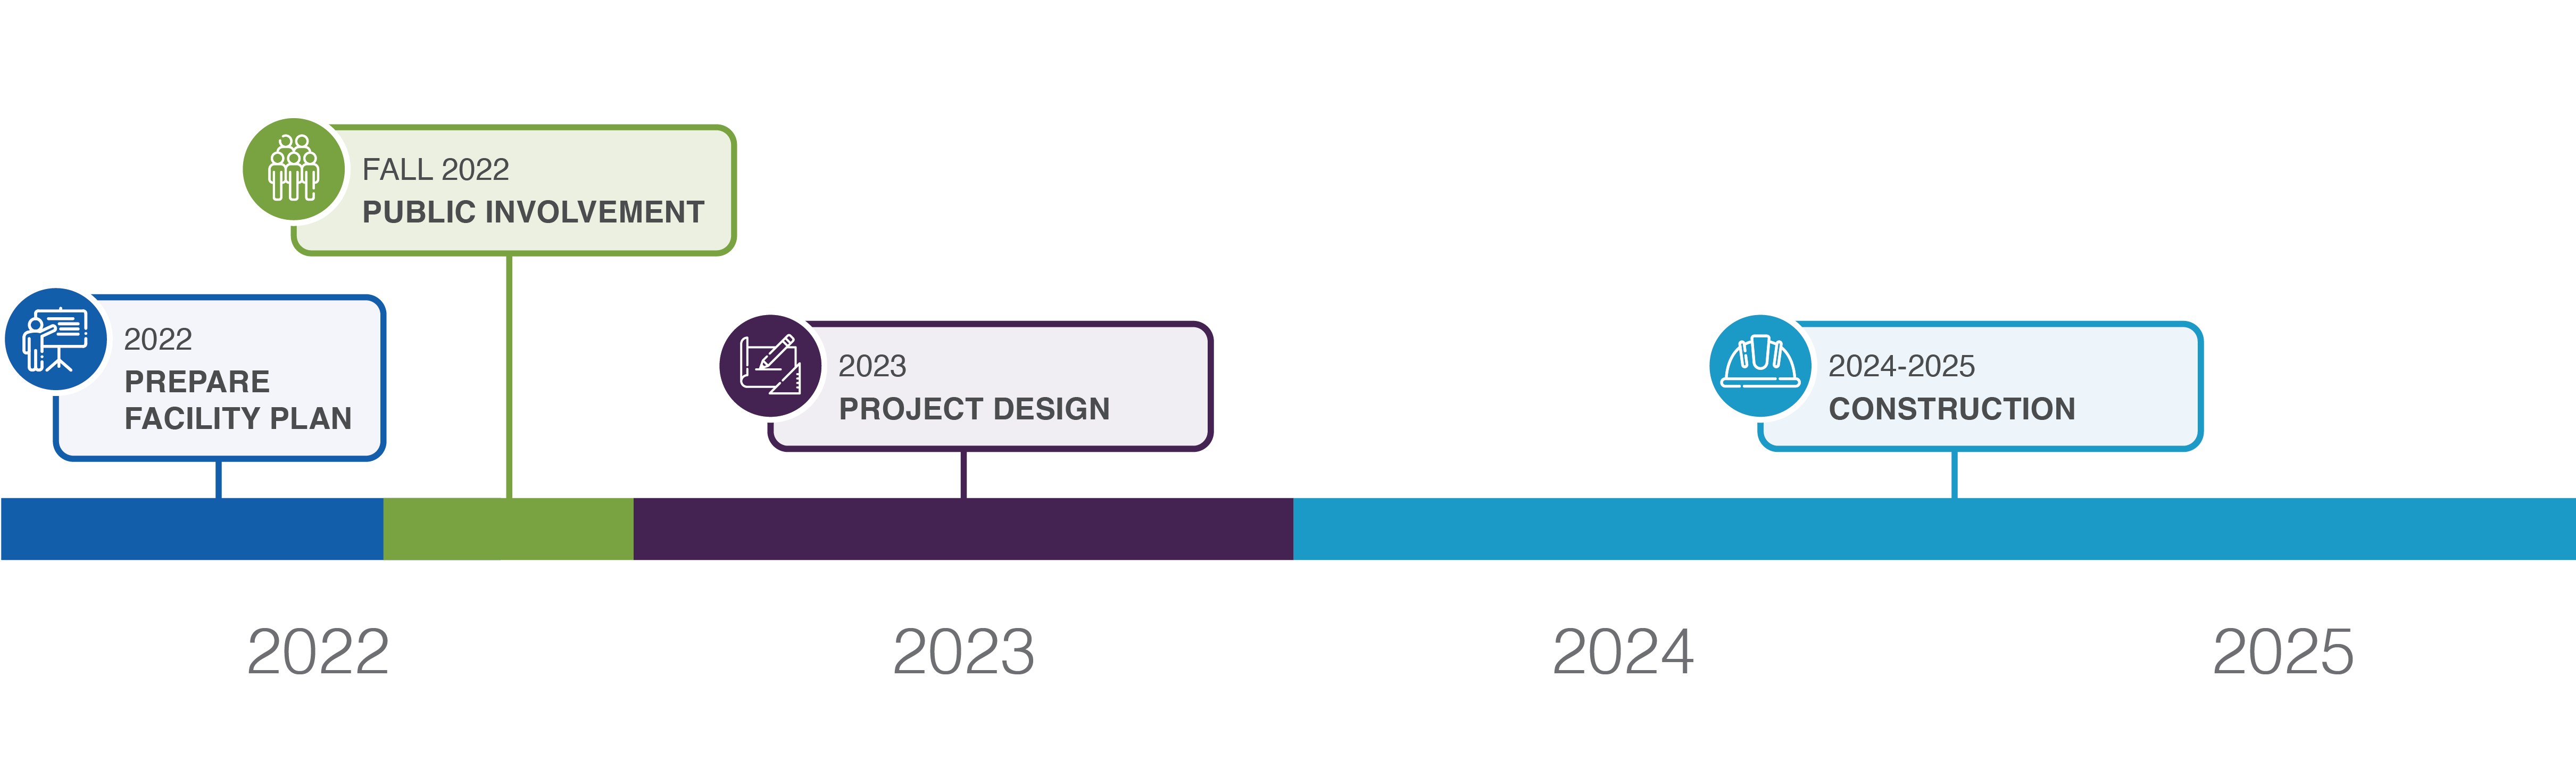 Harrison project timeline with facility plan preparation in 2022 followed by public involvement, project design in 2023, and construction in 2024 and 2025.